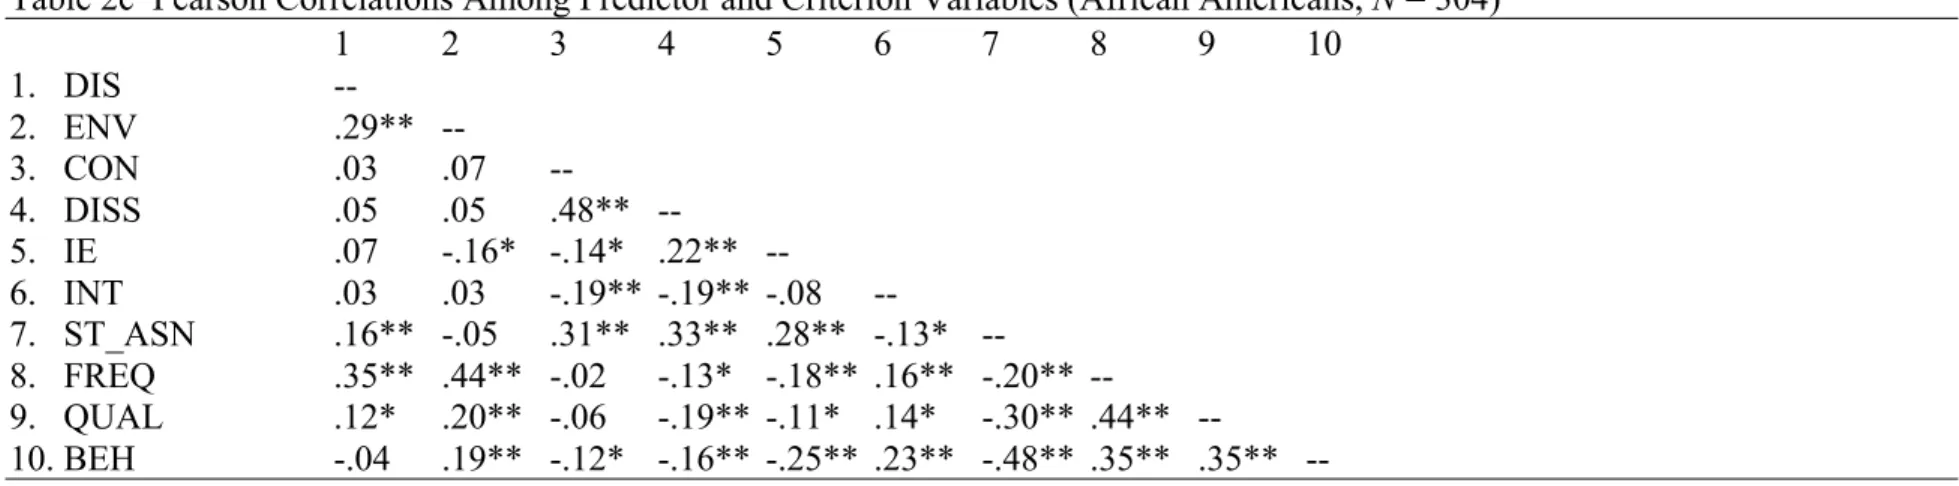 Table 2c  Pearson Correlations Among Predictor and Criterion Variables (African Americans, N = 304)  1  2  3  4  5  6  7  8  9  10  1